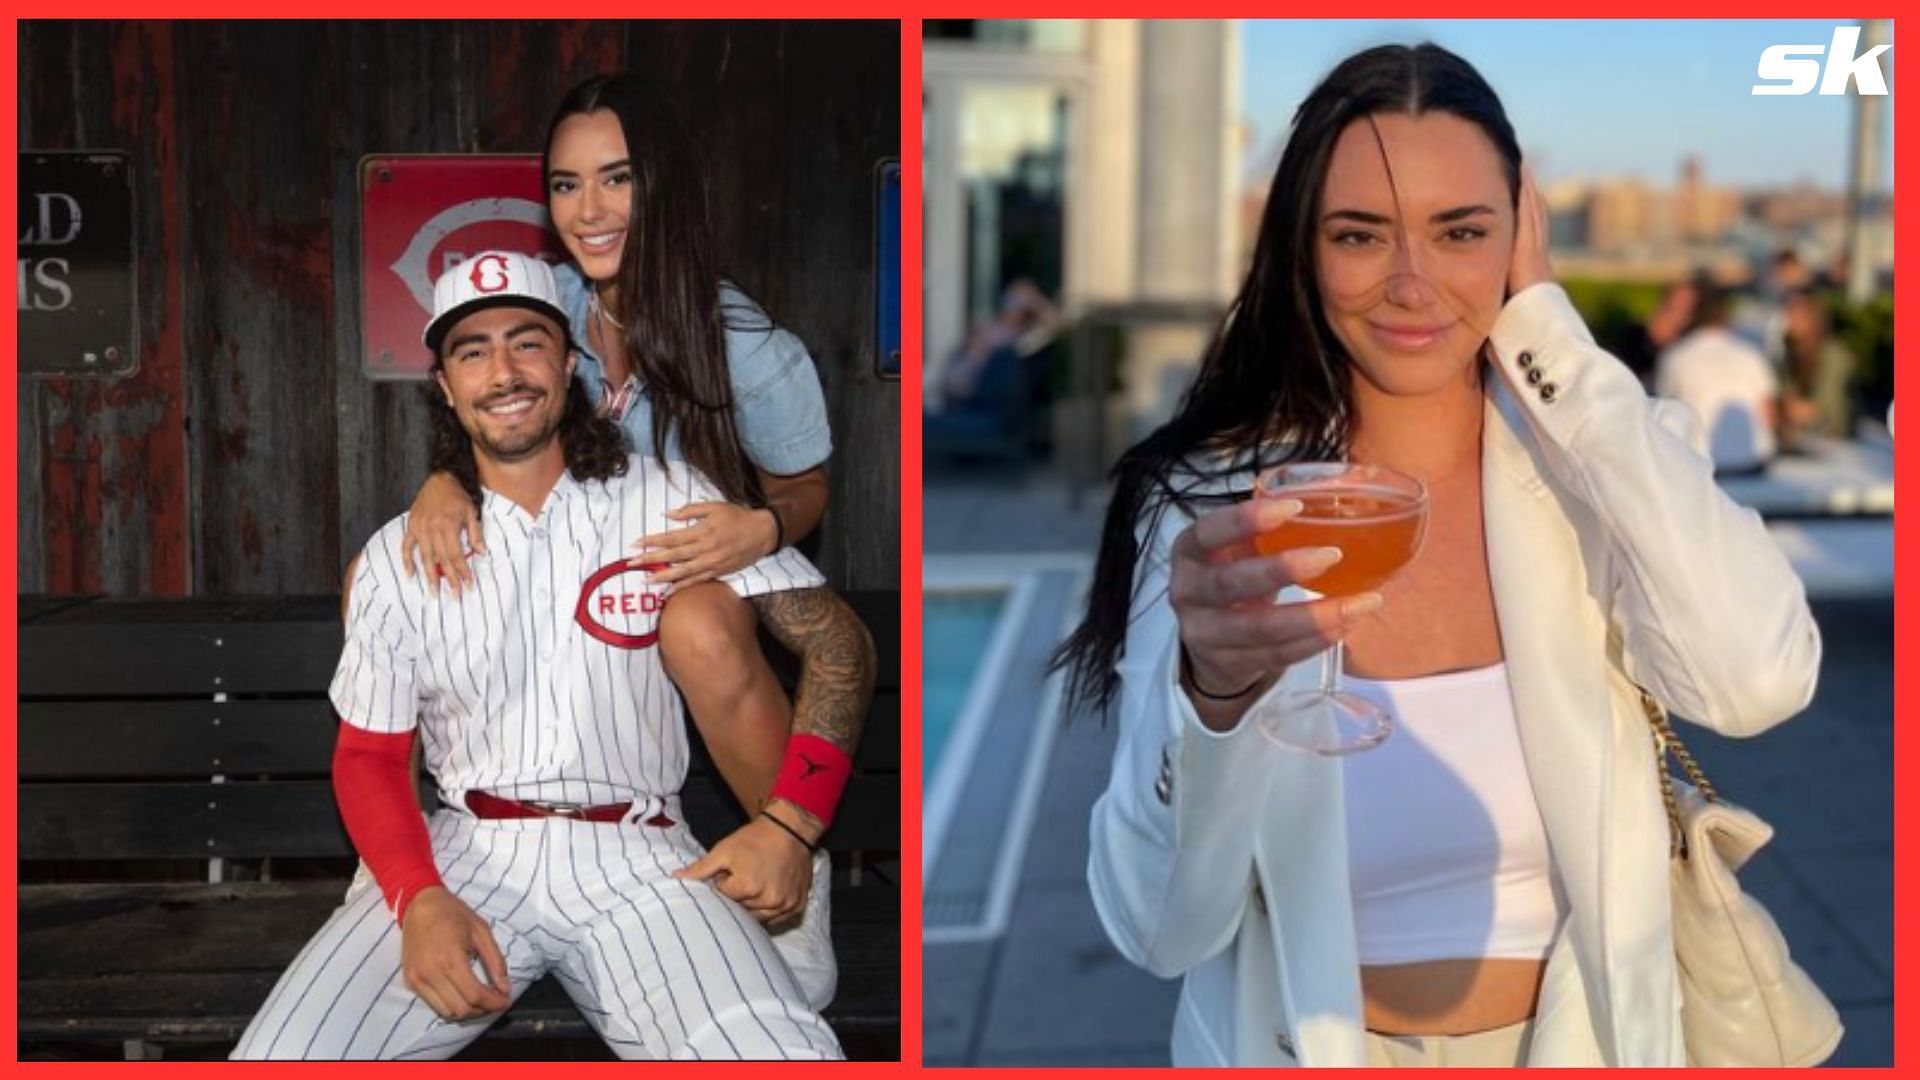 Jonathan India: Who is Jonathan India's girlfriend, Danielle Garcia? A  glimpse into the personal life of Reds star